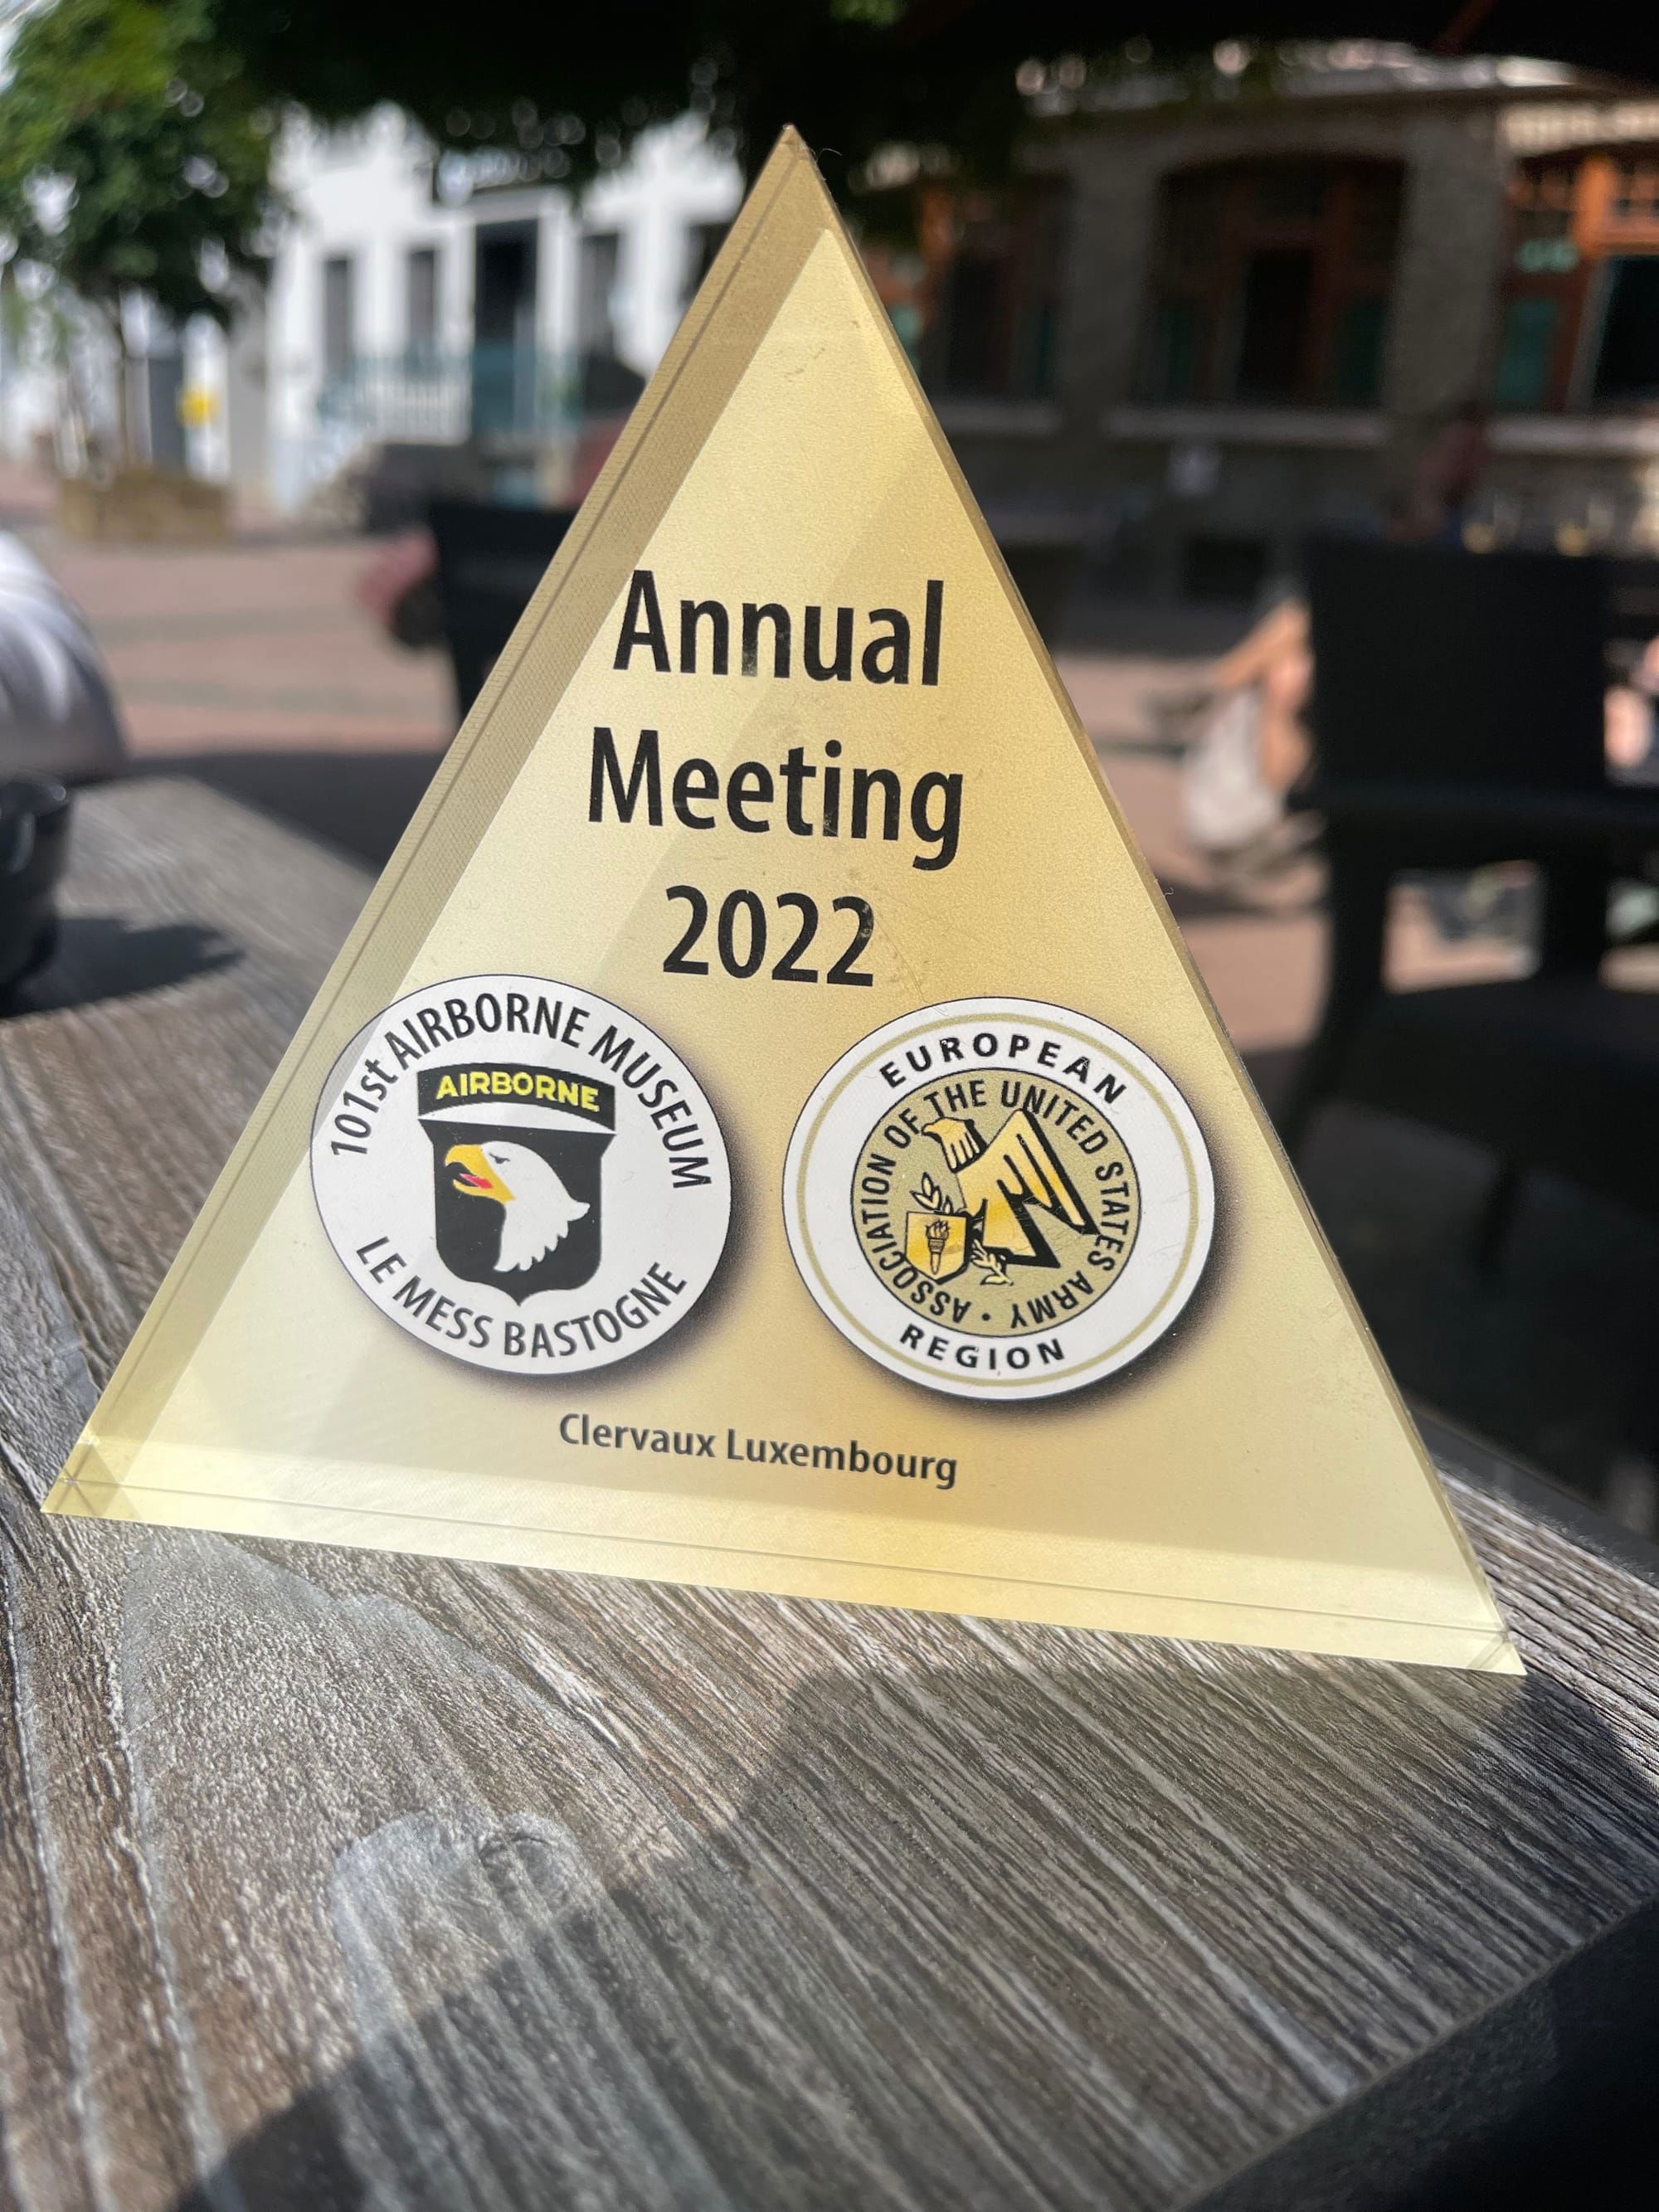 June 19th, 2022 Briefing Annual Meeting Association US Army